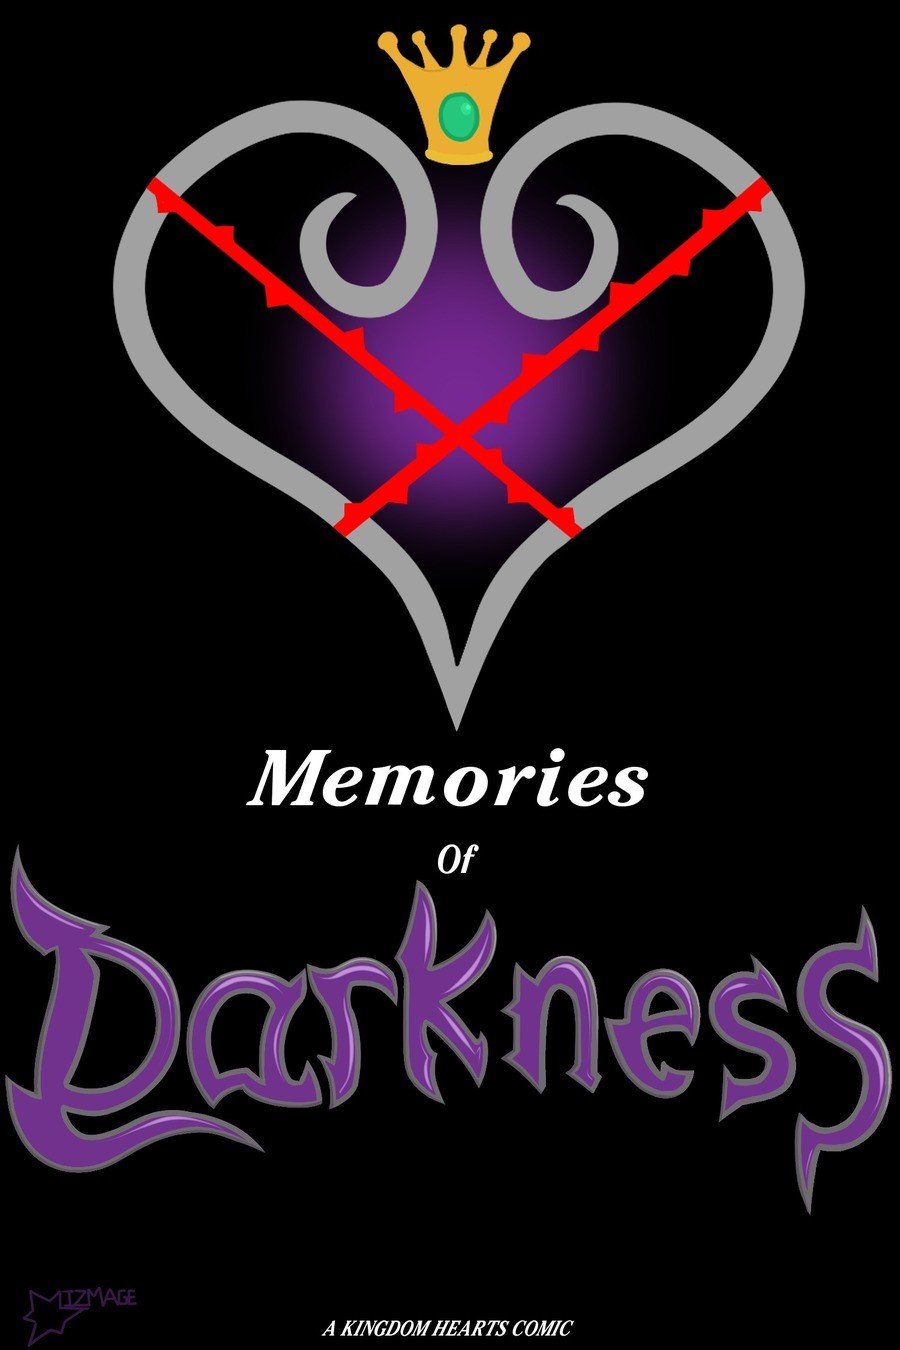 Memories of Darkness part 2 Repost. Its part 2... That is all. Hopefully i can get part 3 out in like the next 2 months. itll be shorter, but more dialogue heav